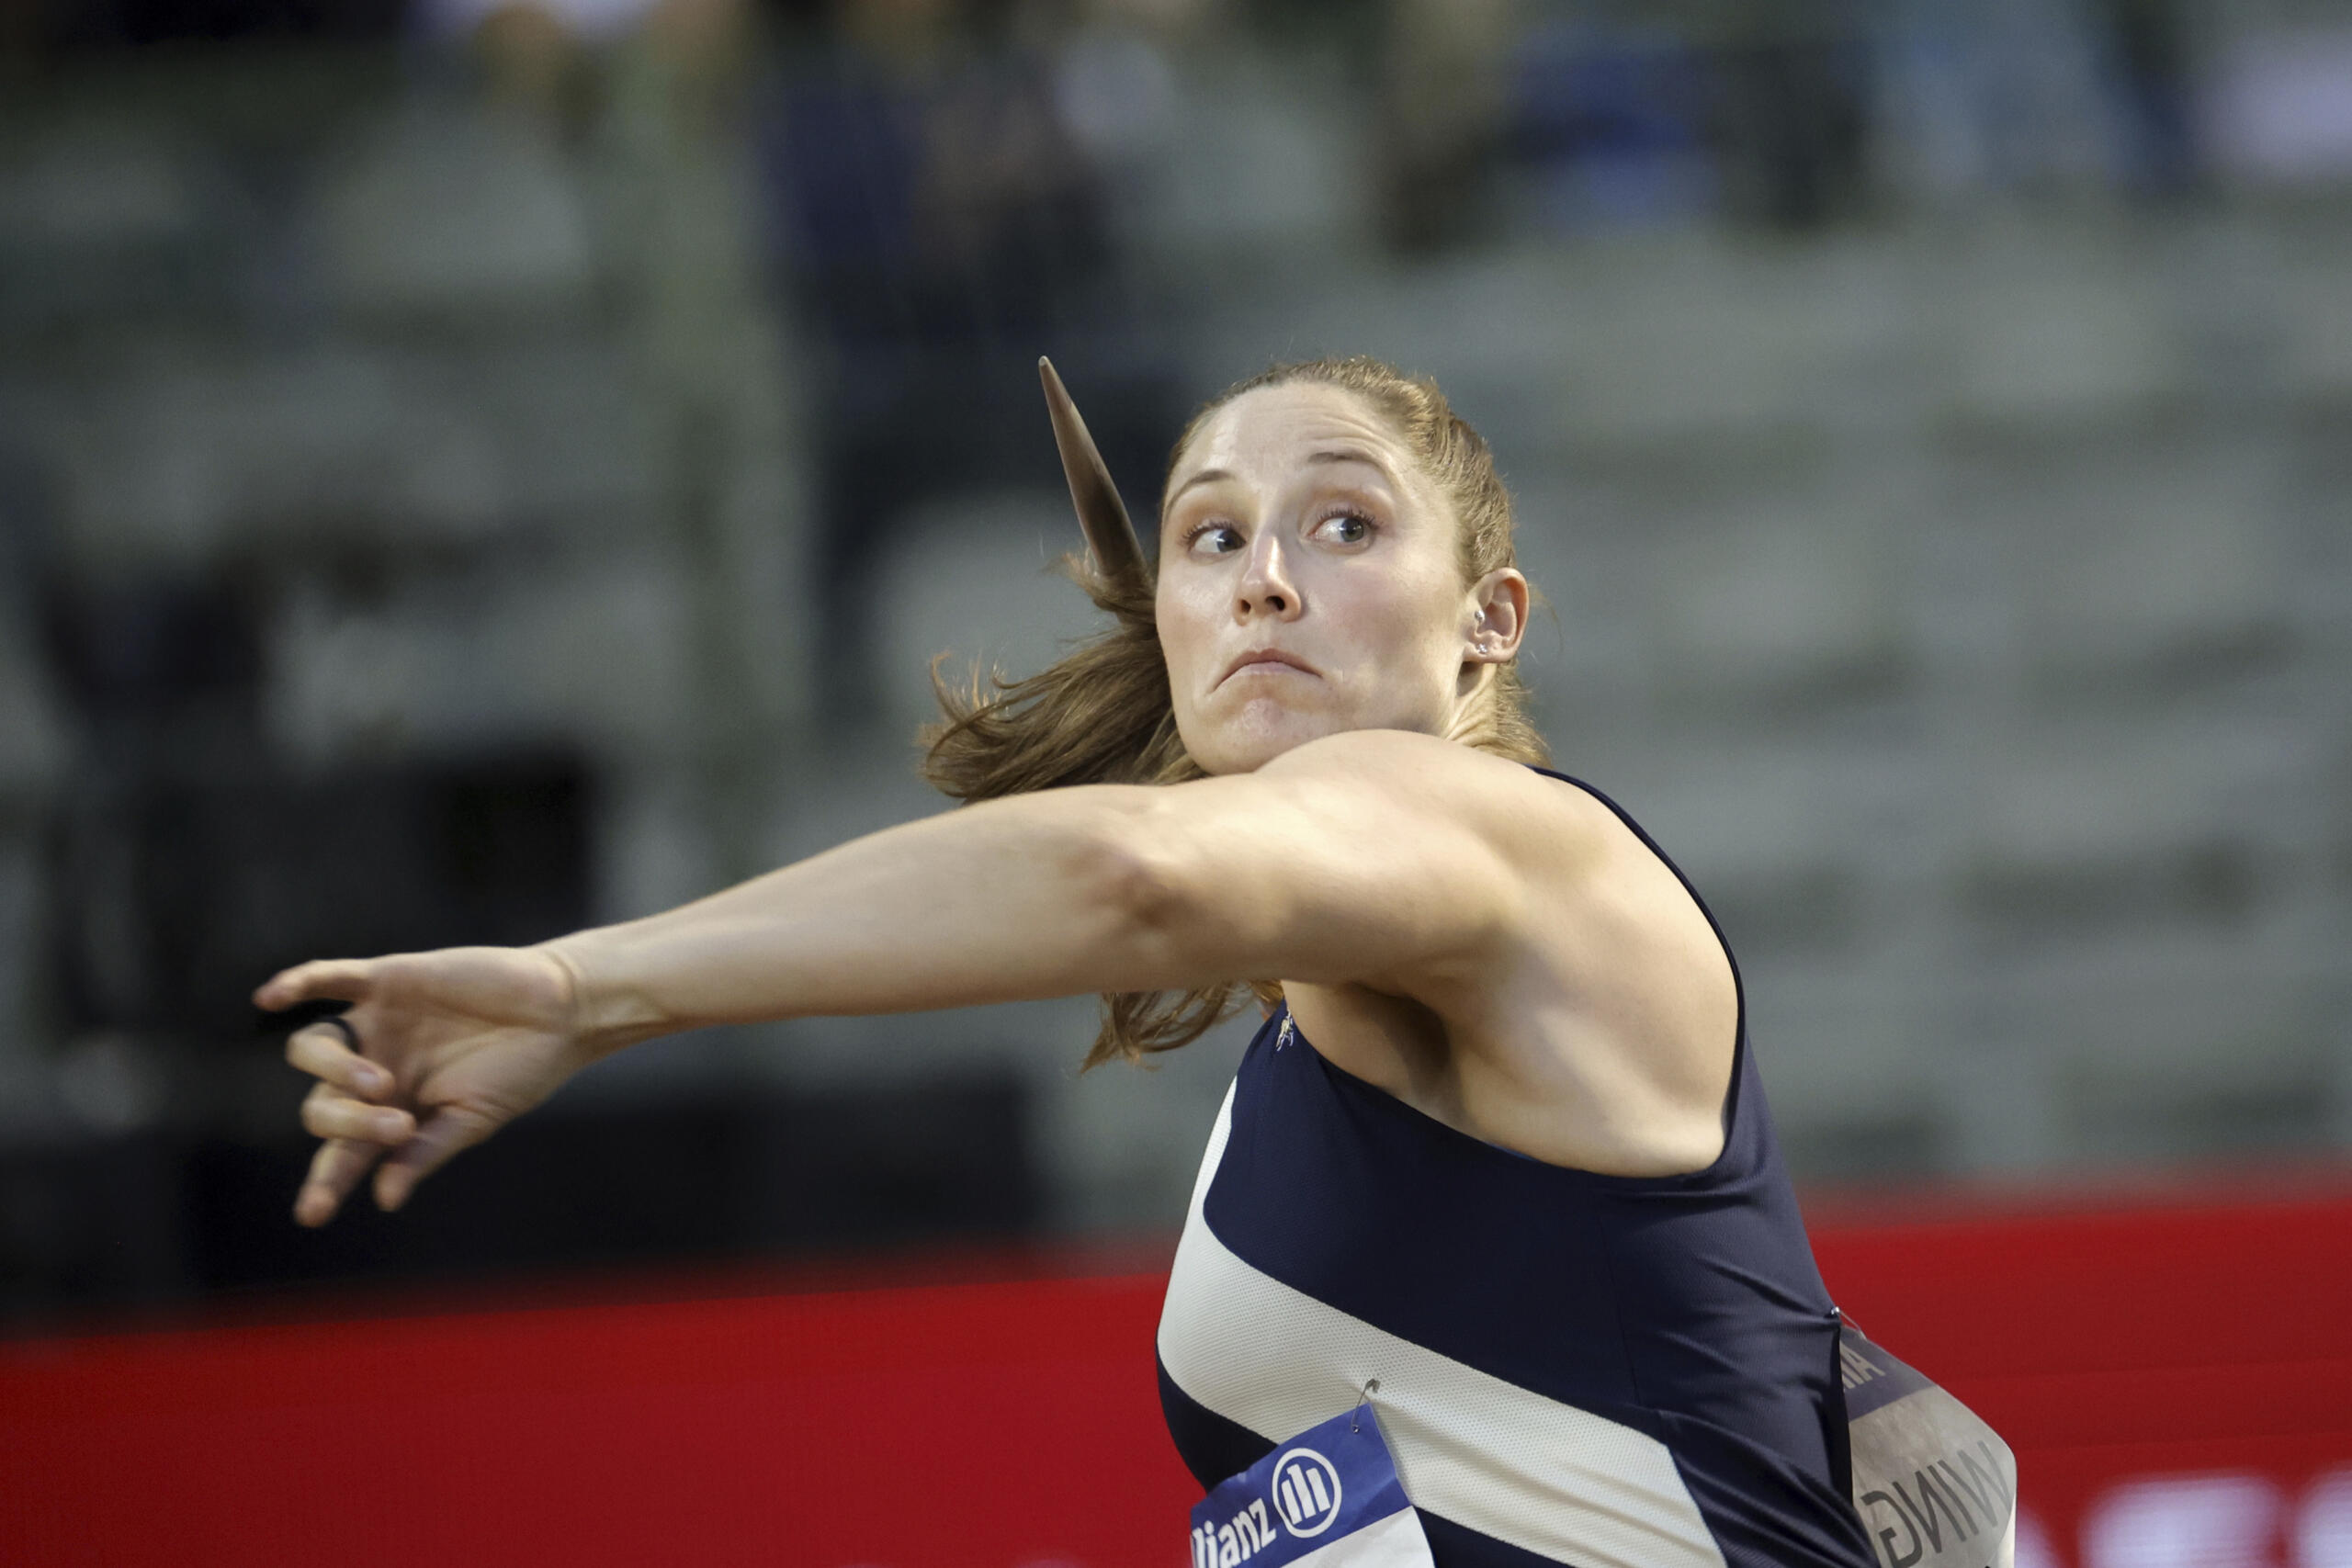 United States Kara Winger competes during the women's javelin throw at the Diamond League Memorial Van Damme athletics event at the King Baudouin stadium, Brussels, Friday, Sept. 2, 2022.